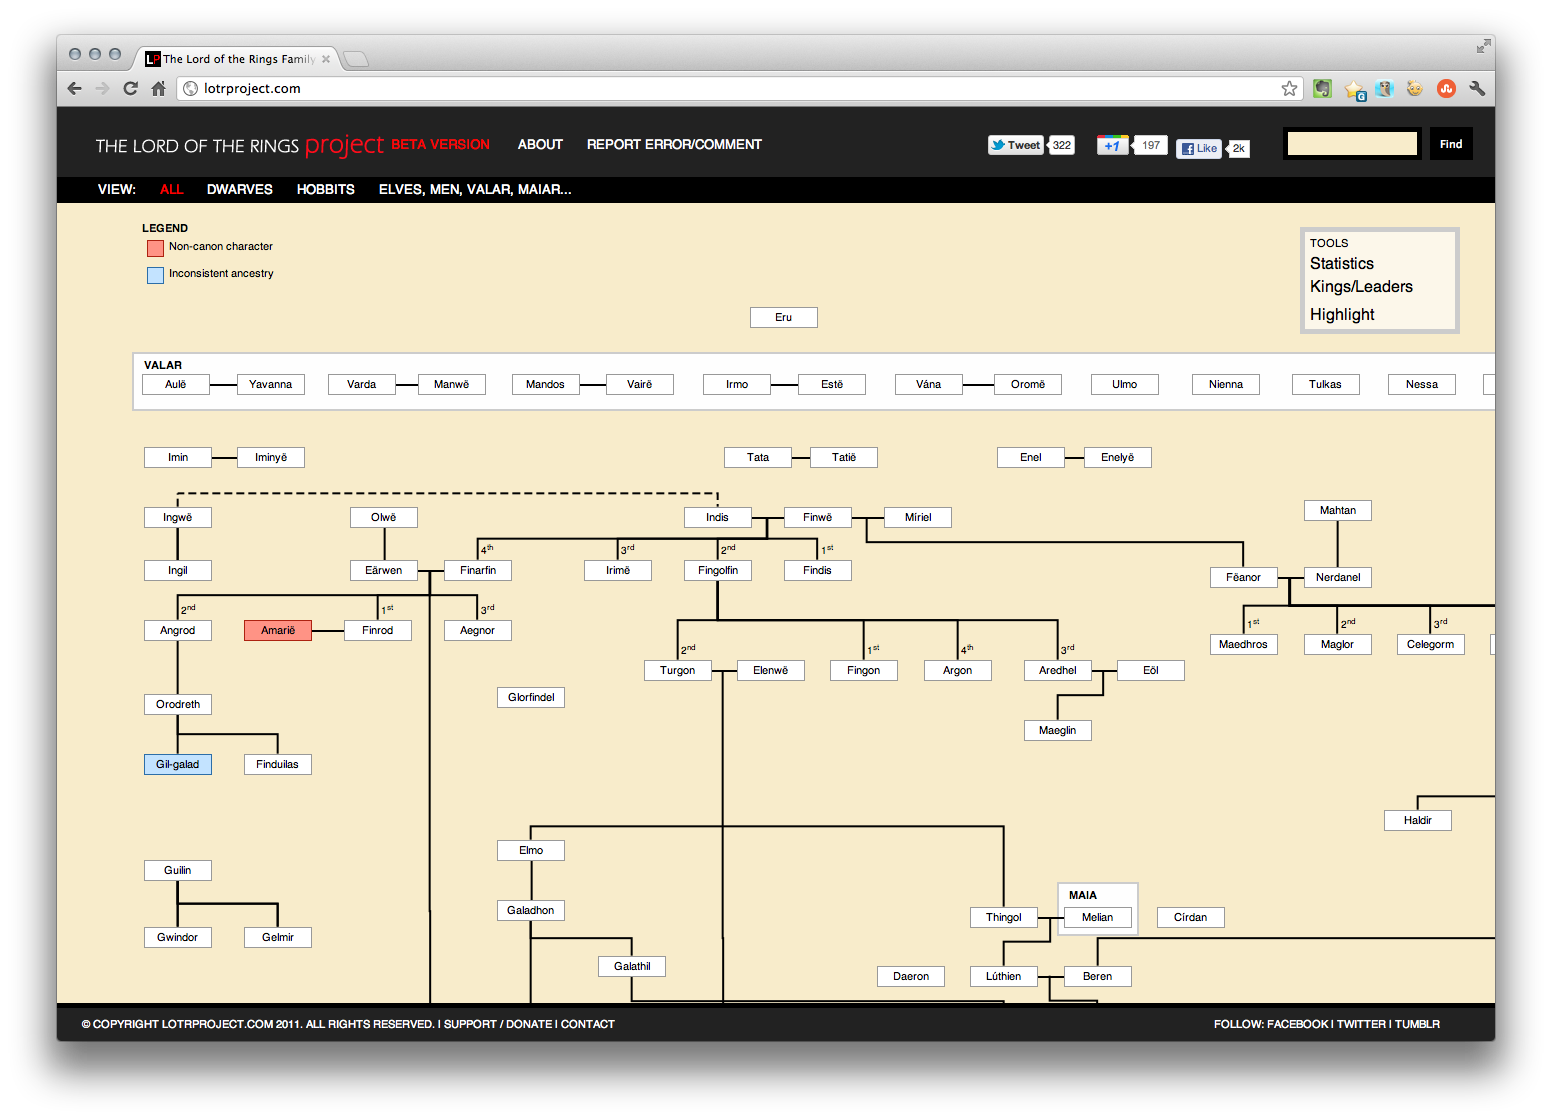 konvertering smække Barry This Lord of the Rings Interactive Family Tree is EPIC - ChurchMag